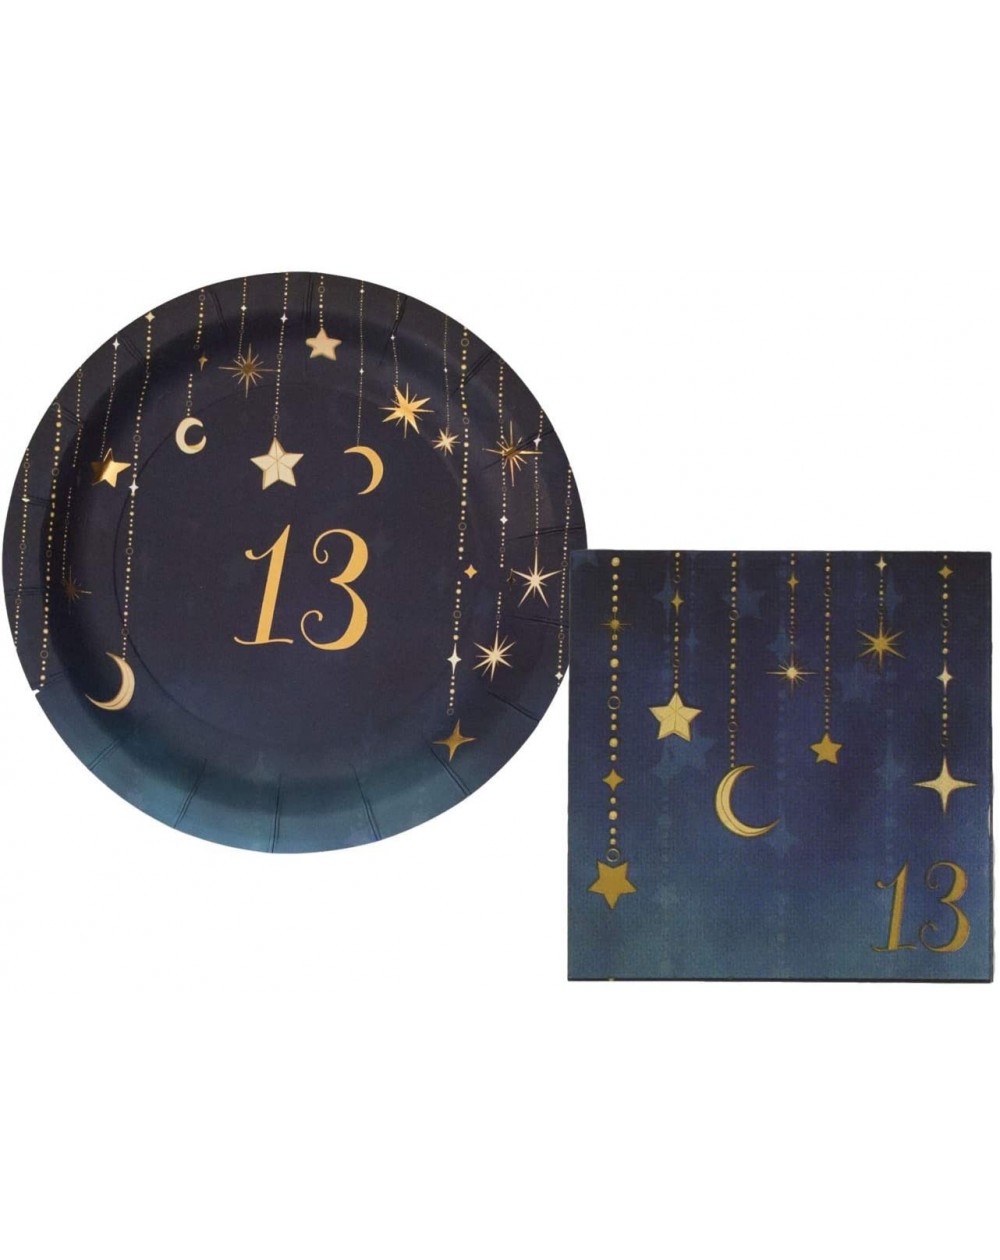 Party Packs 13th Birthday Party Supplies Bundle Includes Dessert Plates and Napkins for 16 People in a Starry Night Design - ...